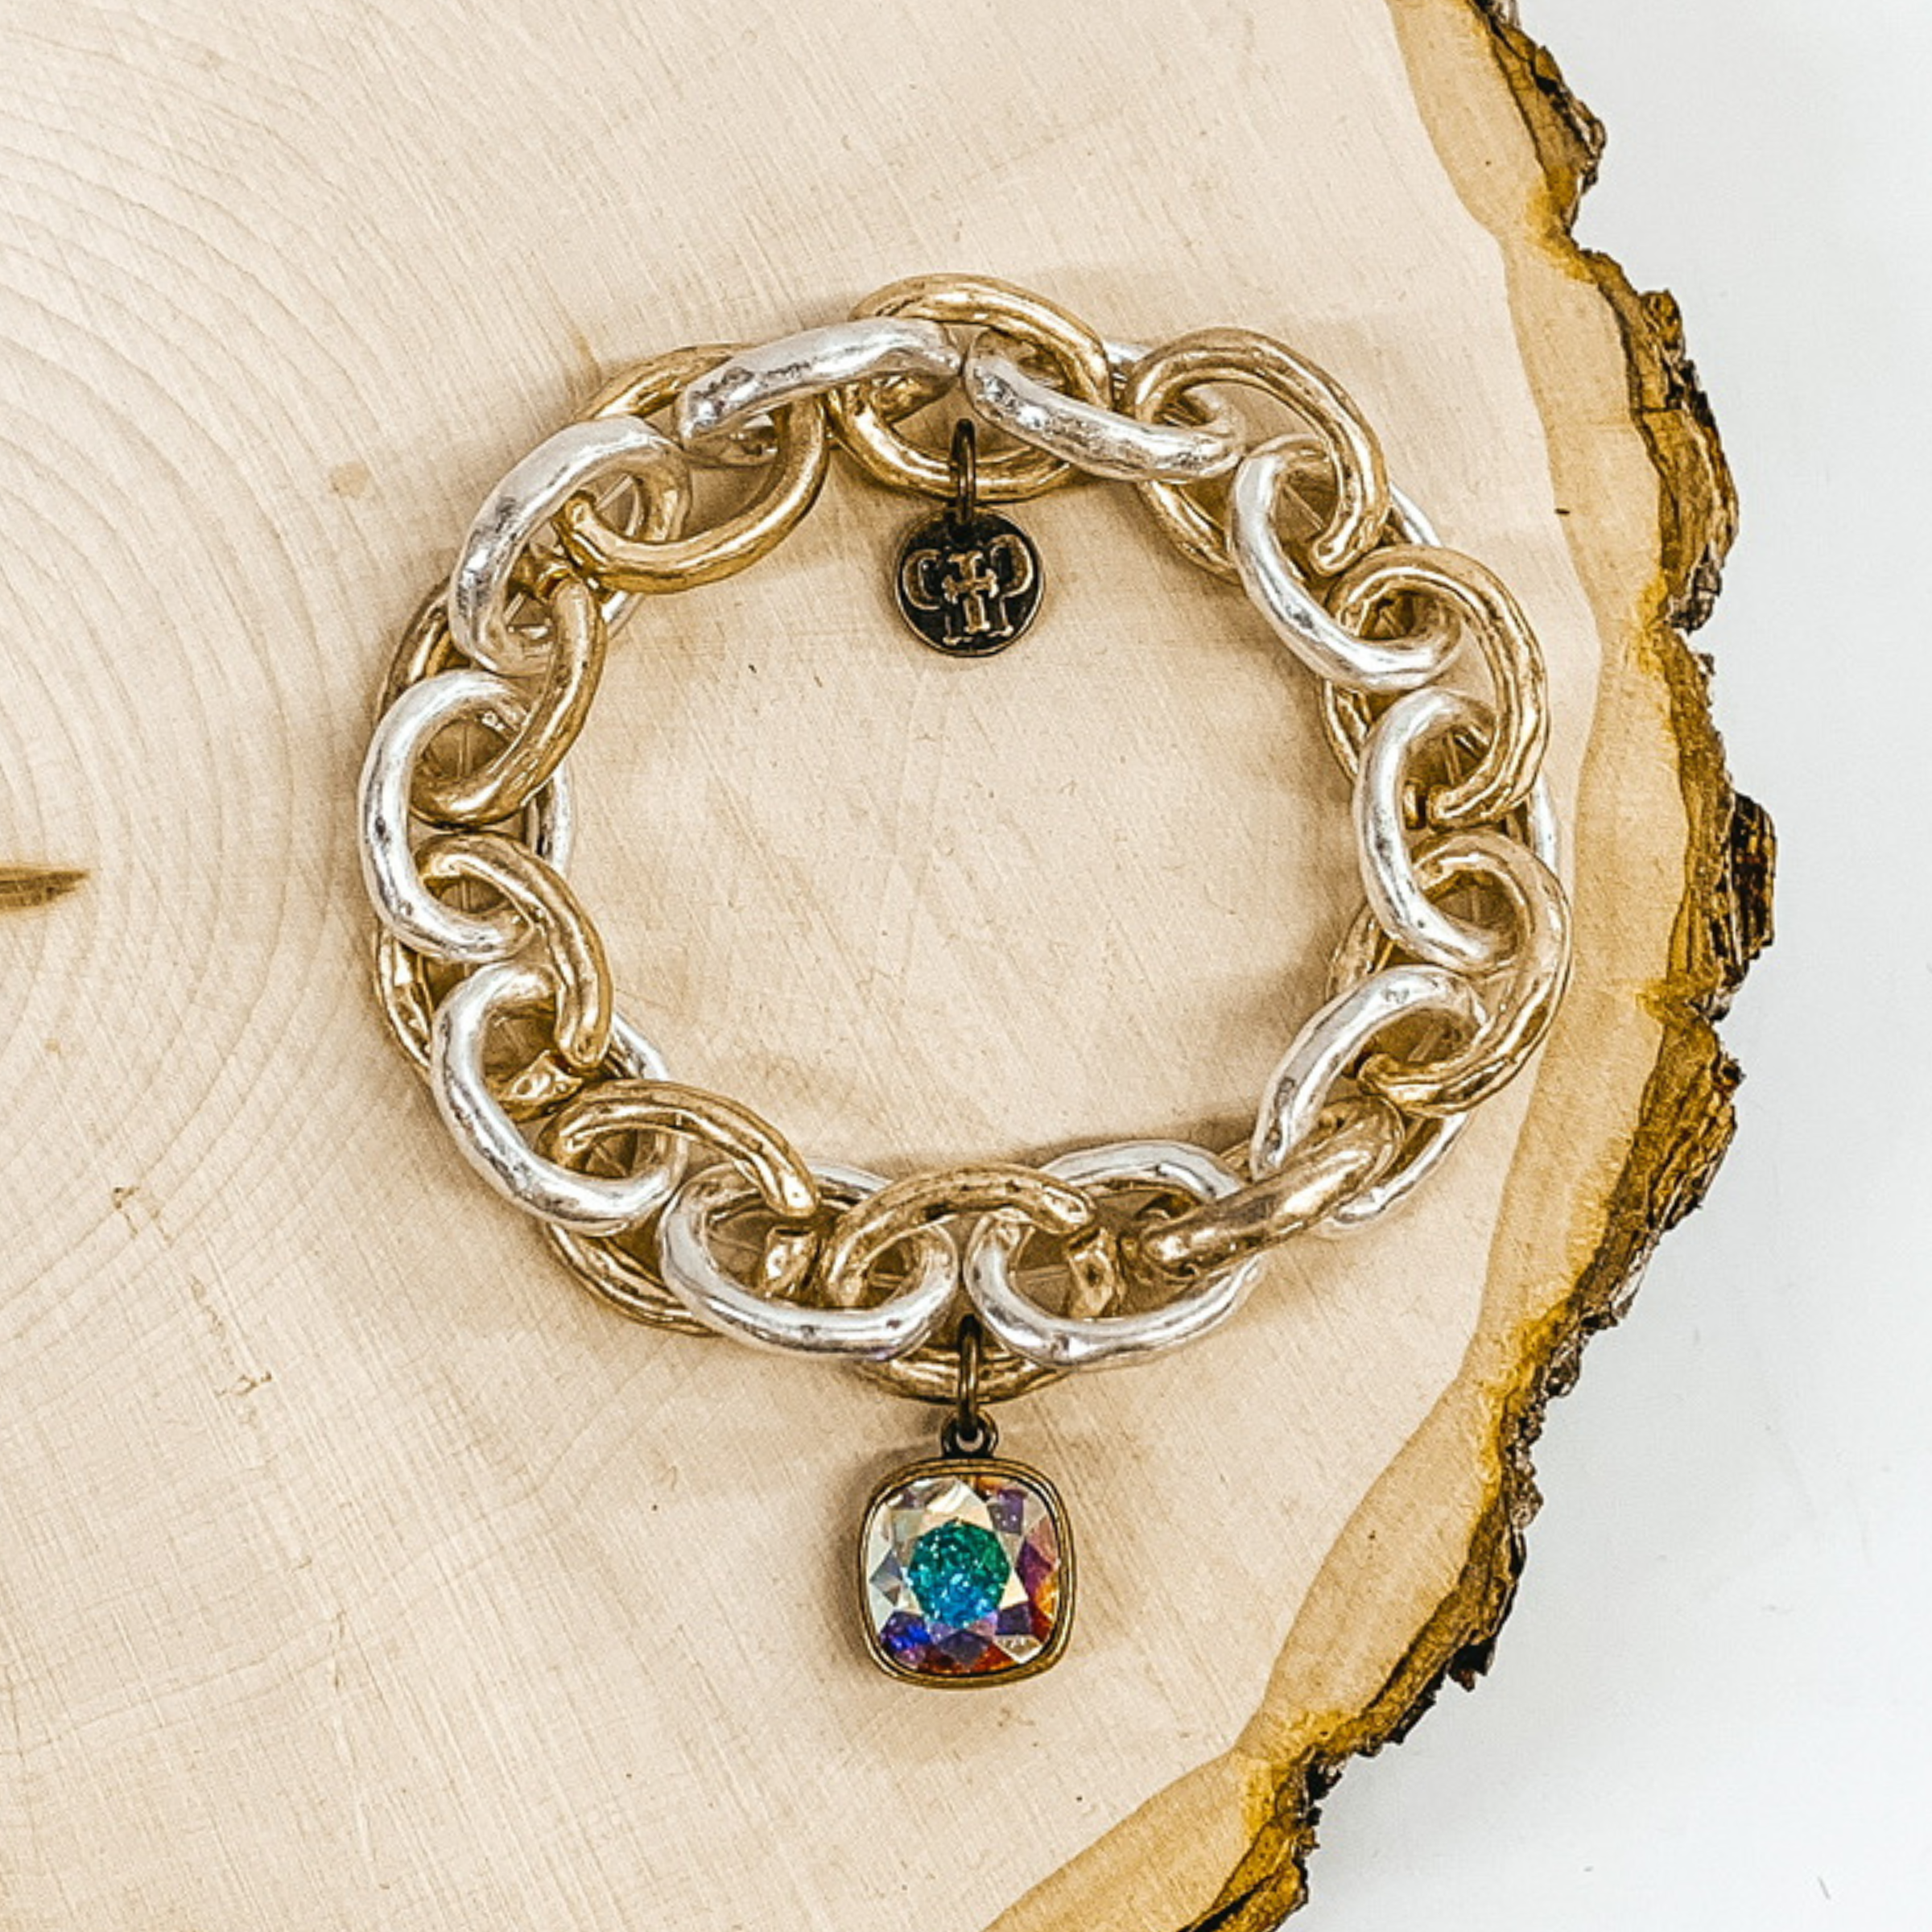 gold and silver chained bracelet with ab crystal charm in bronze